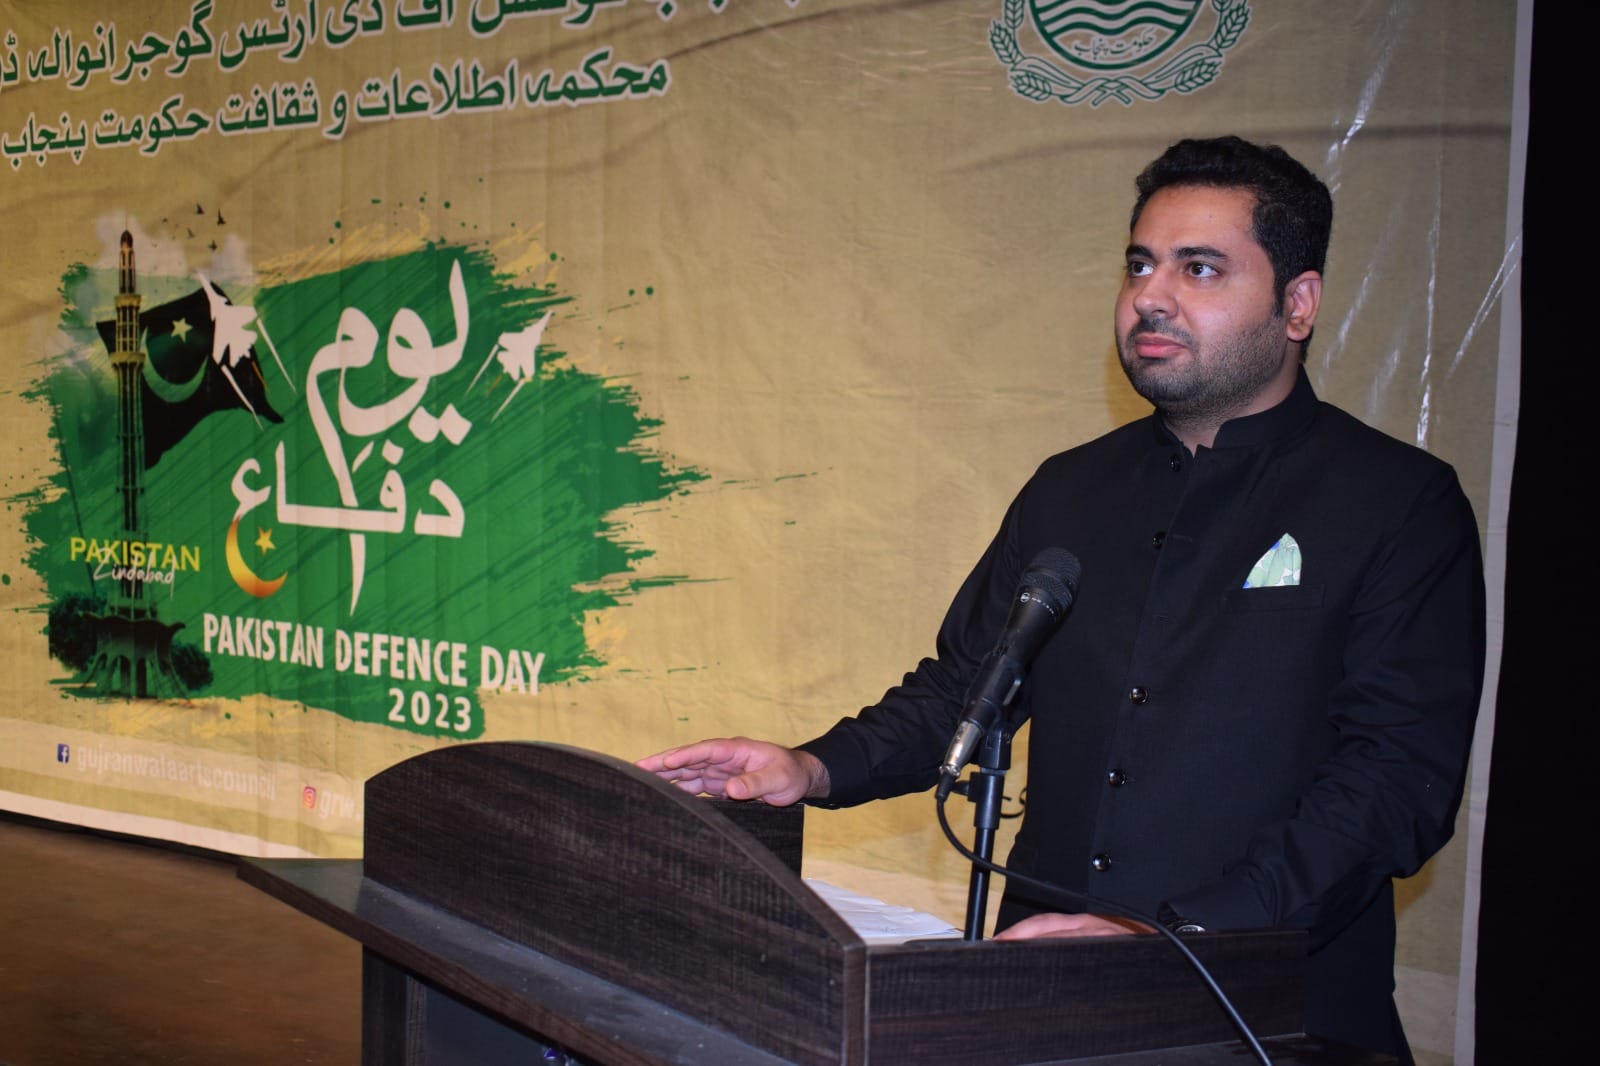 Pakistan Defence Day celebrated at Punjab Council of the Arts Grw.